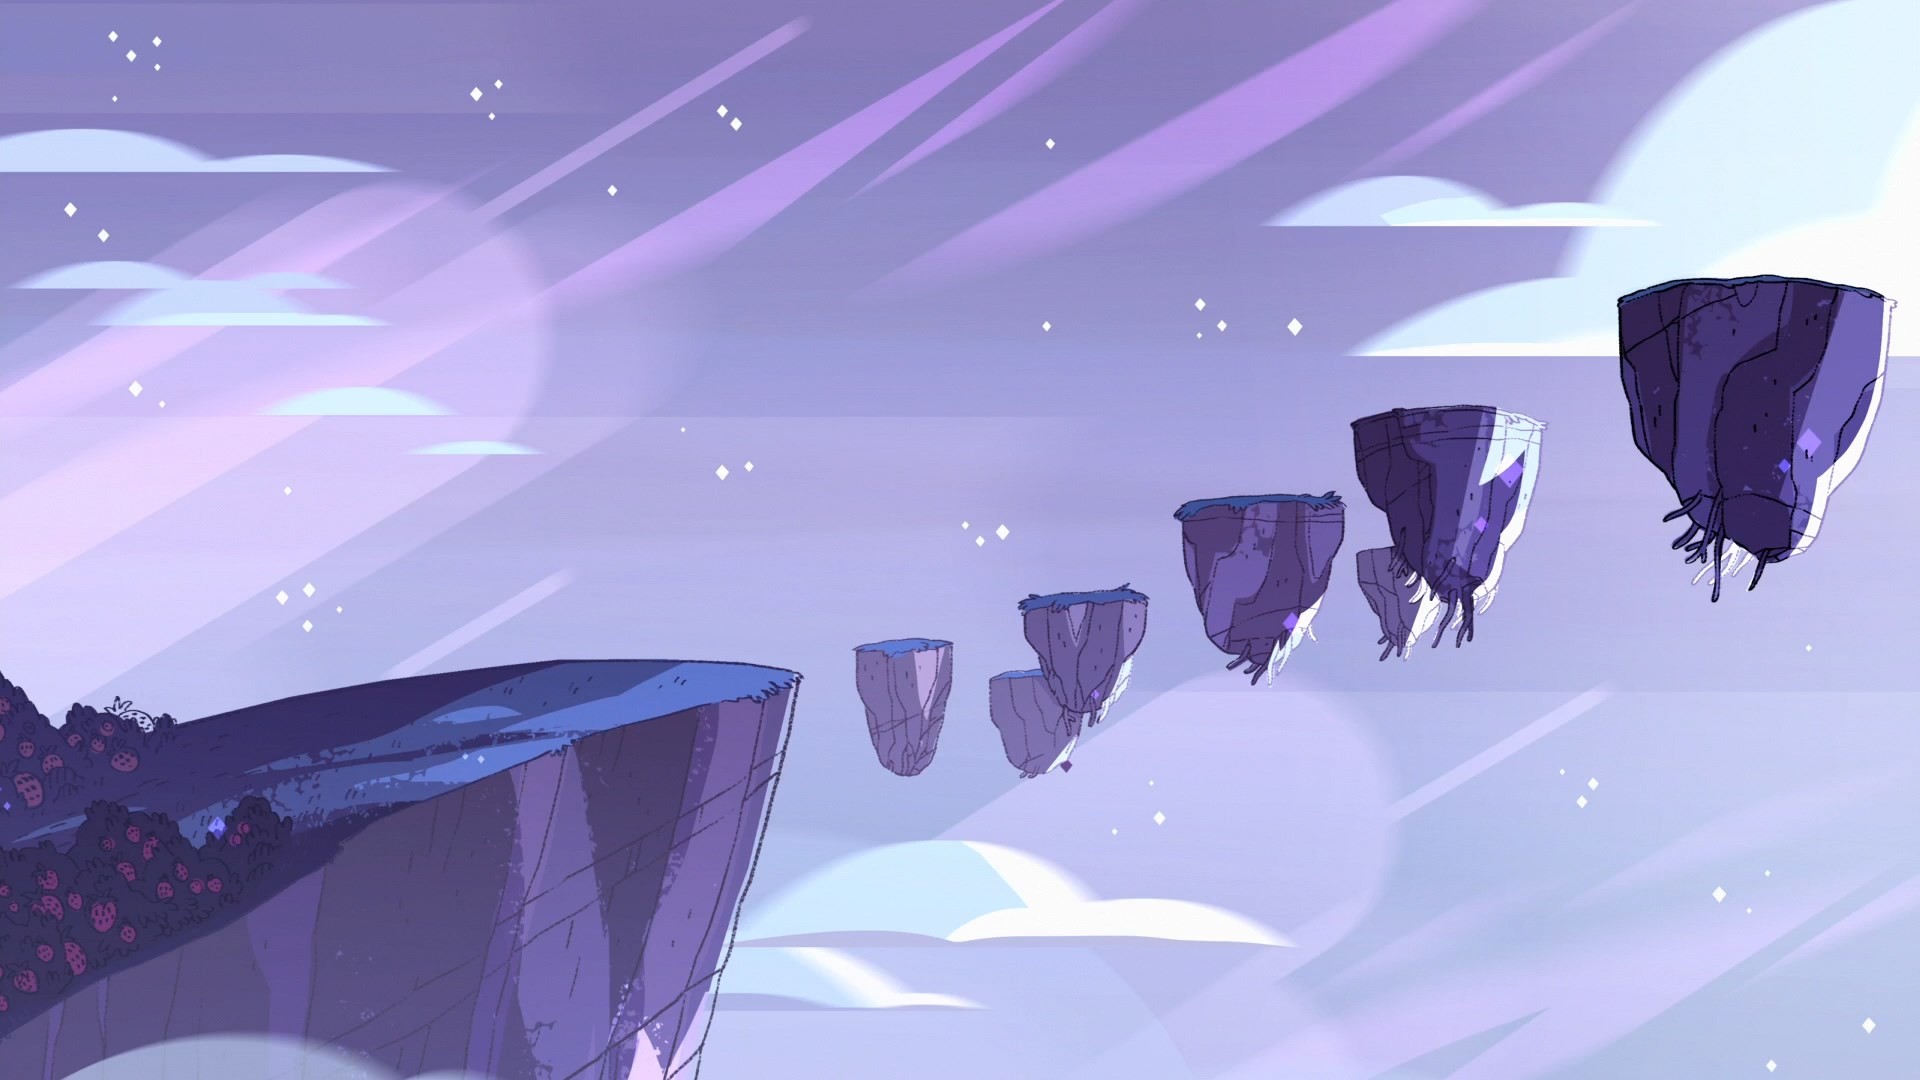 Free screensaver wallpapers for steven universe